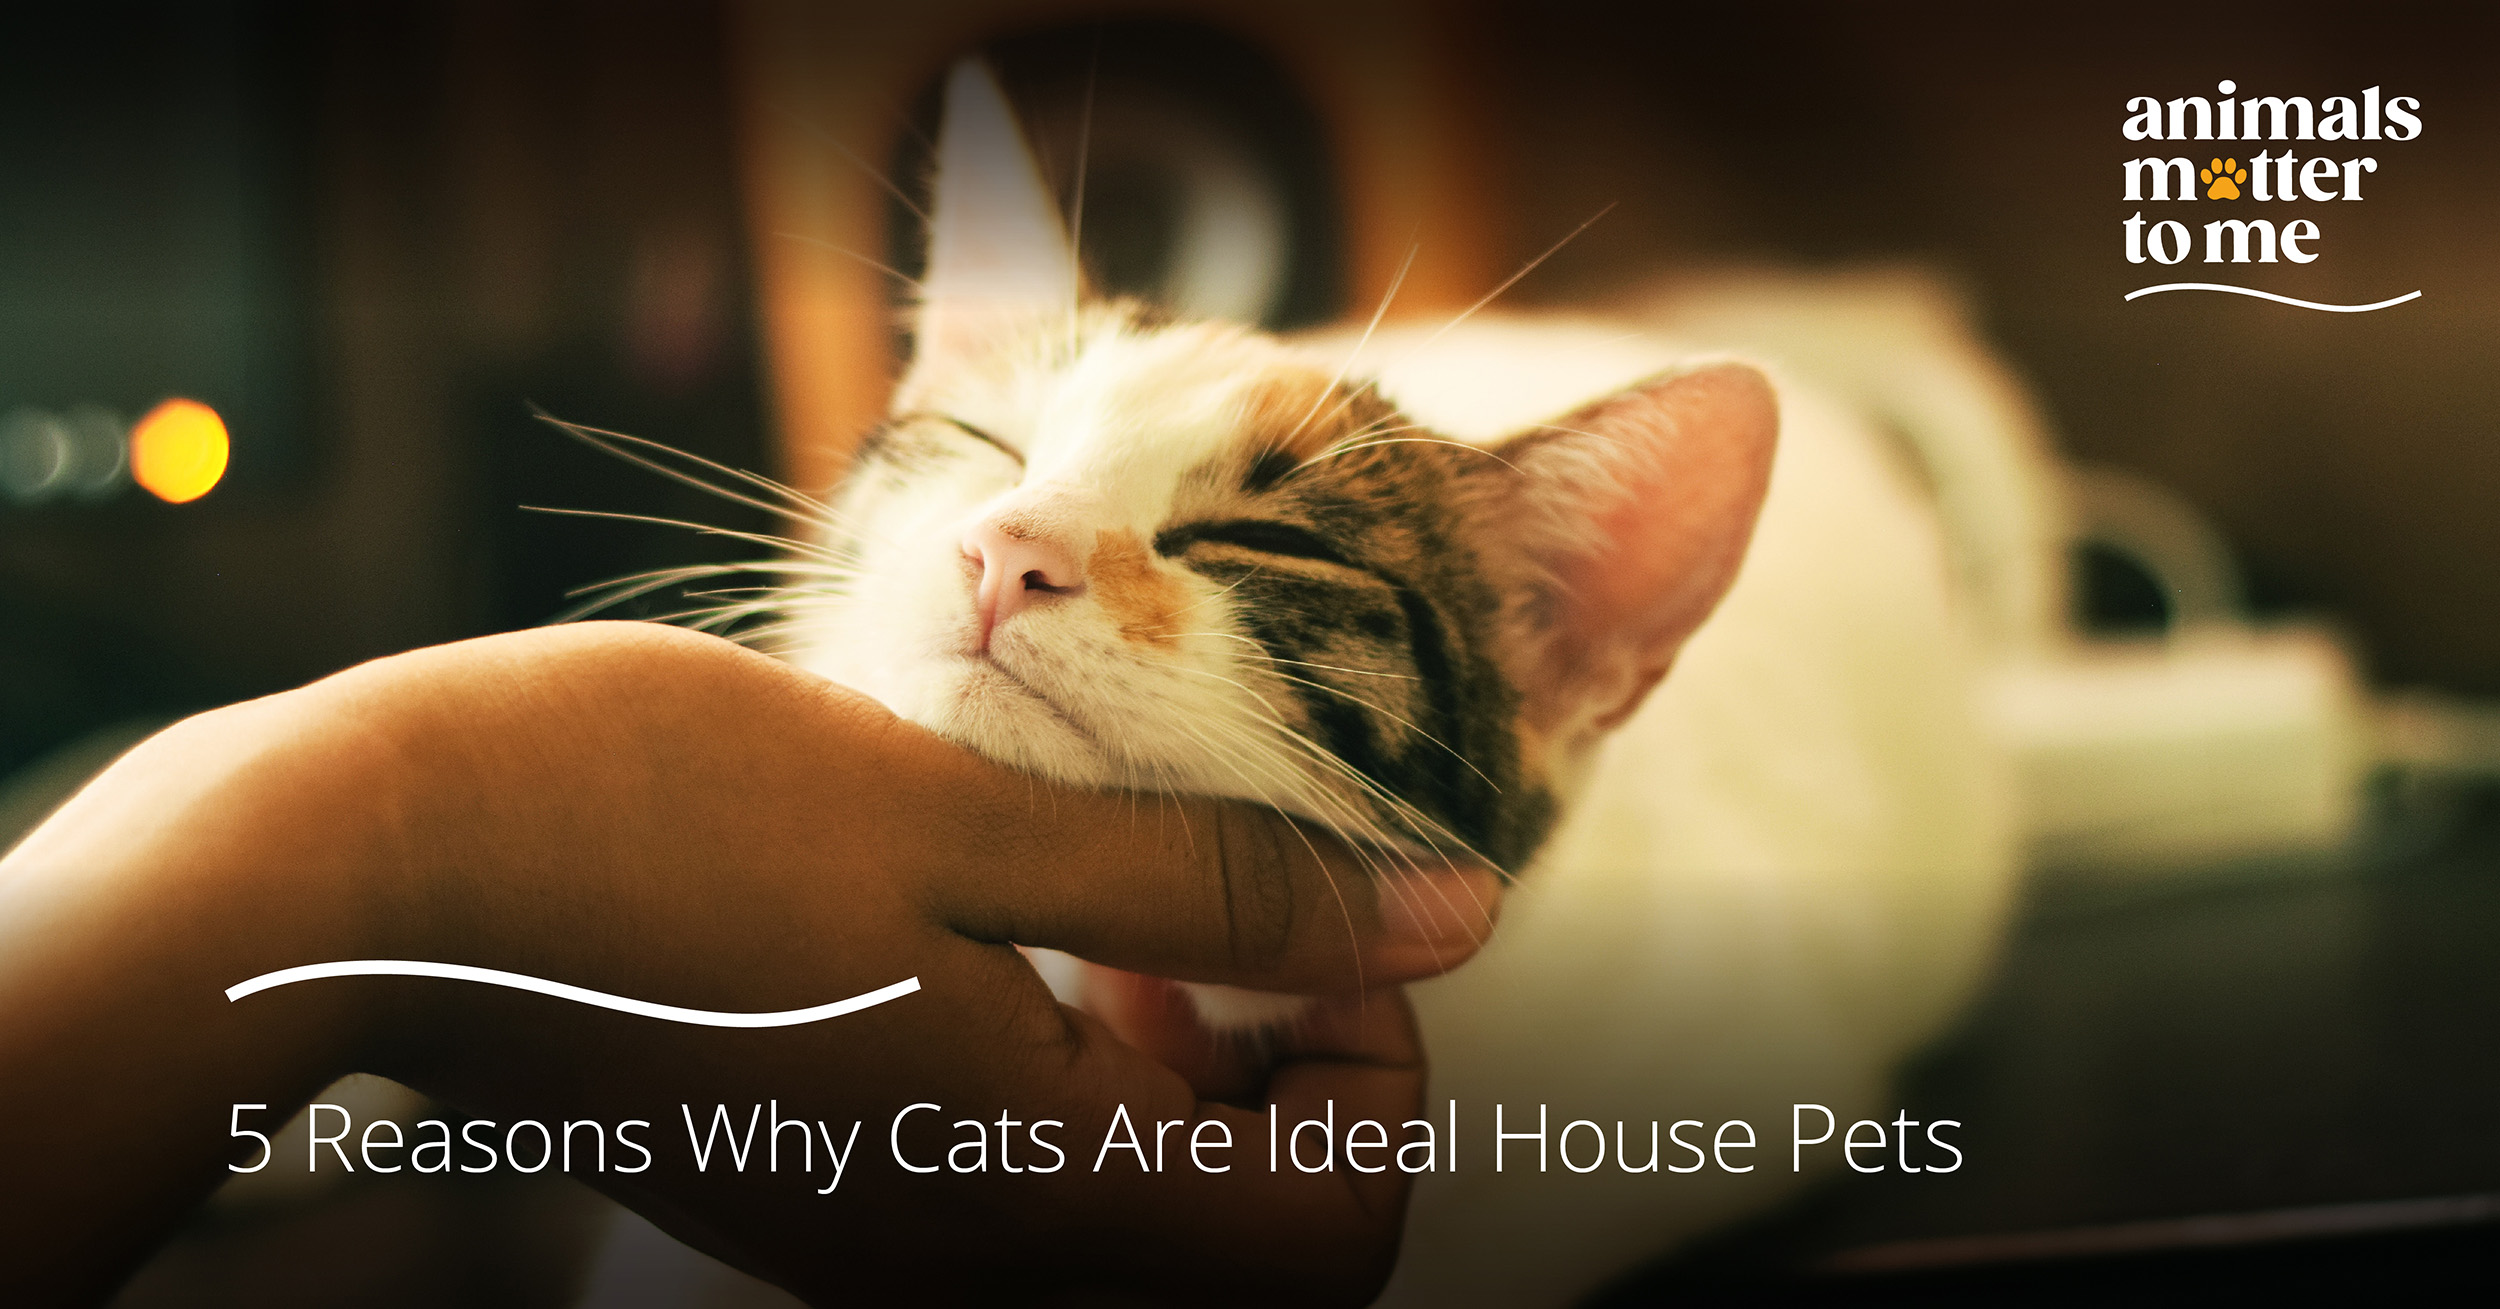 5 Reasons Why Cats Are Ideal House Pets - Animals Matter To Me